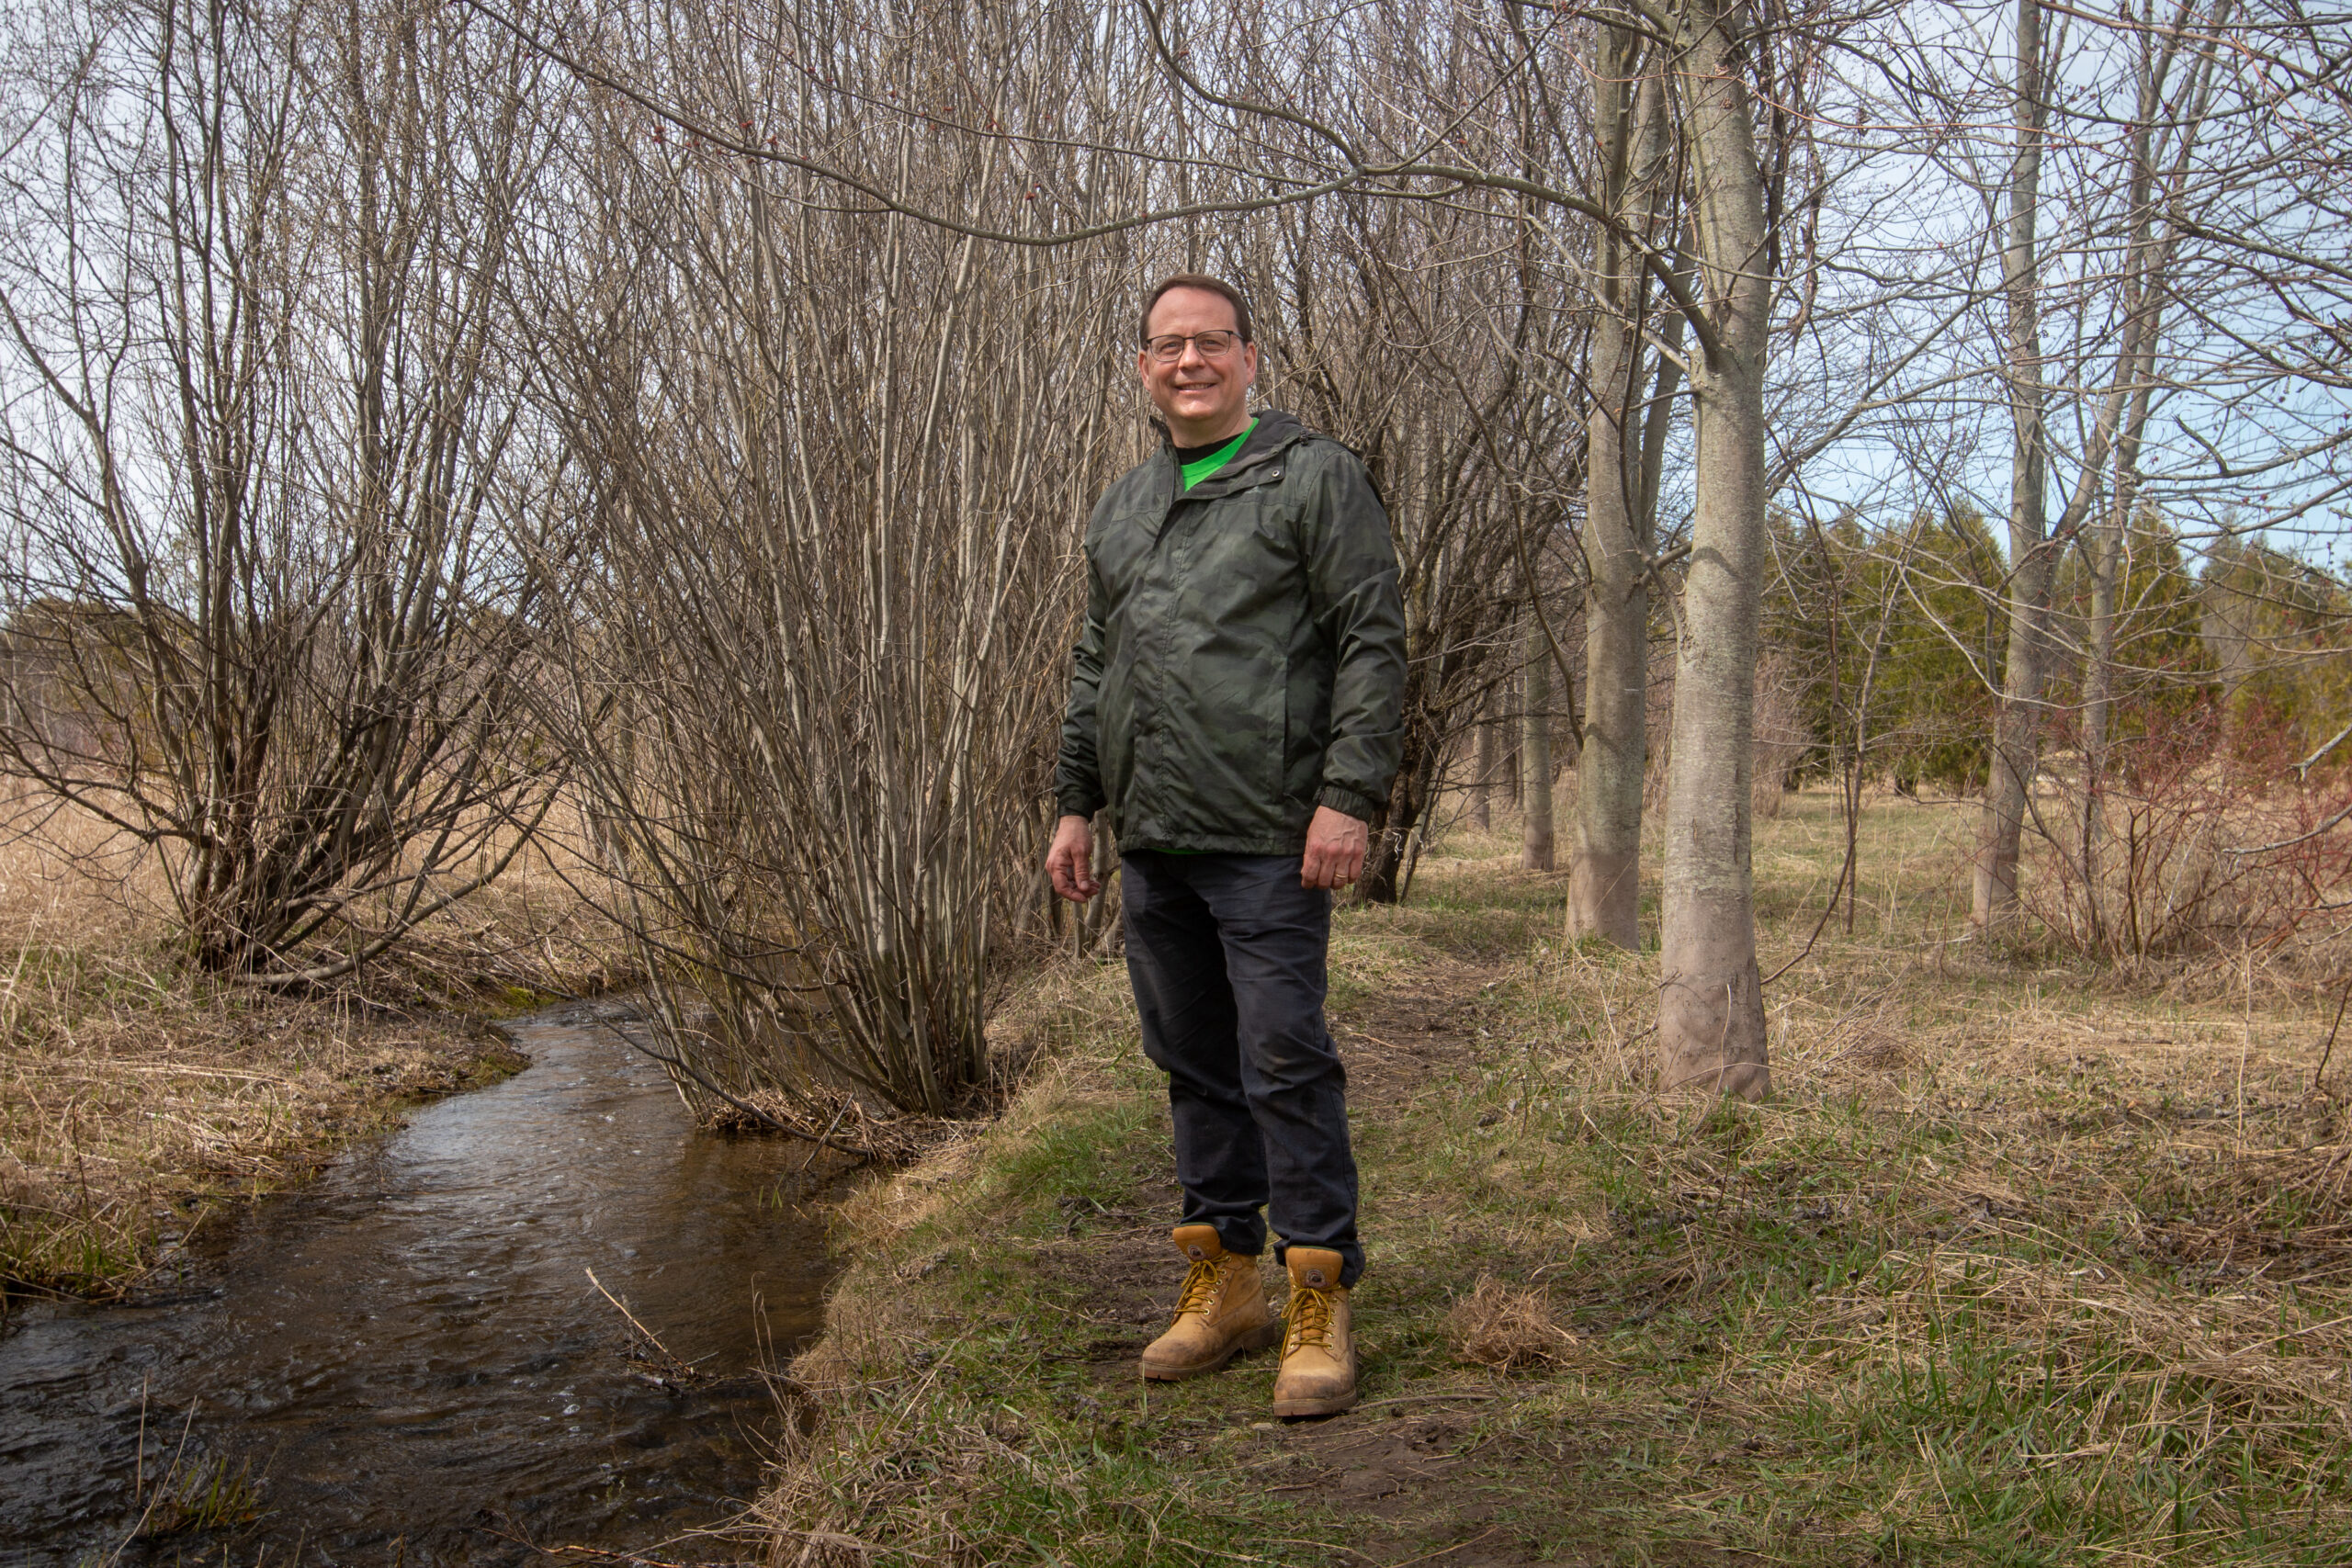 Ontario election 2022: Mike Schreiner wears hiking clothes, standing next to a creek in early spring.